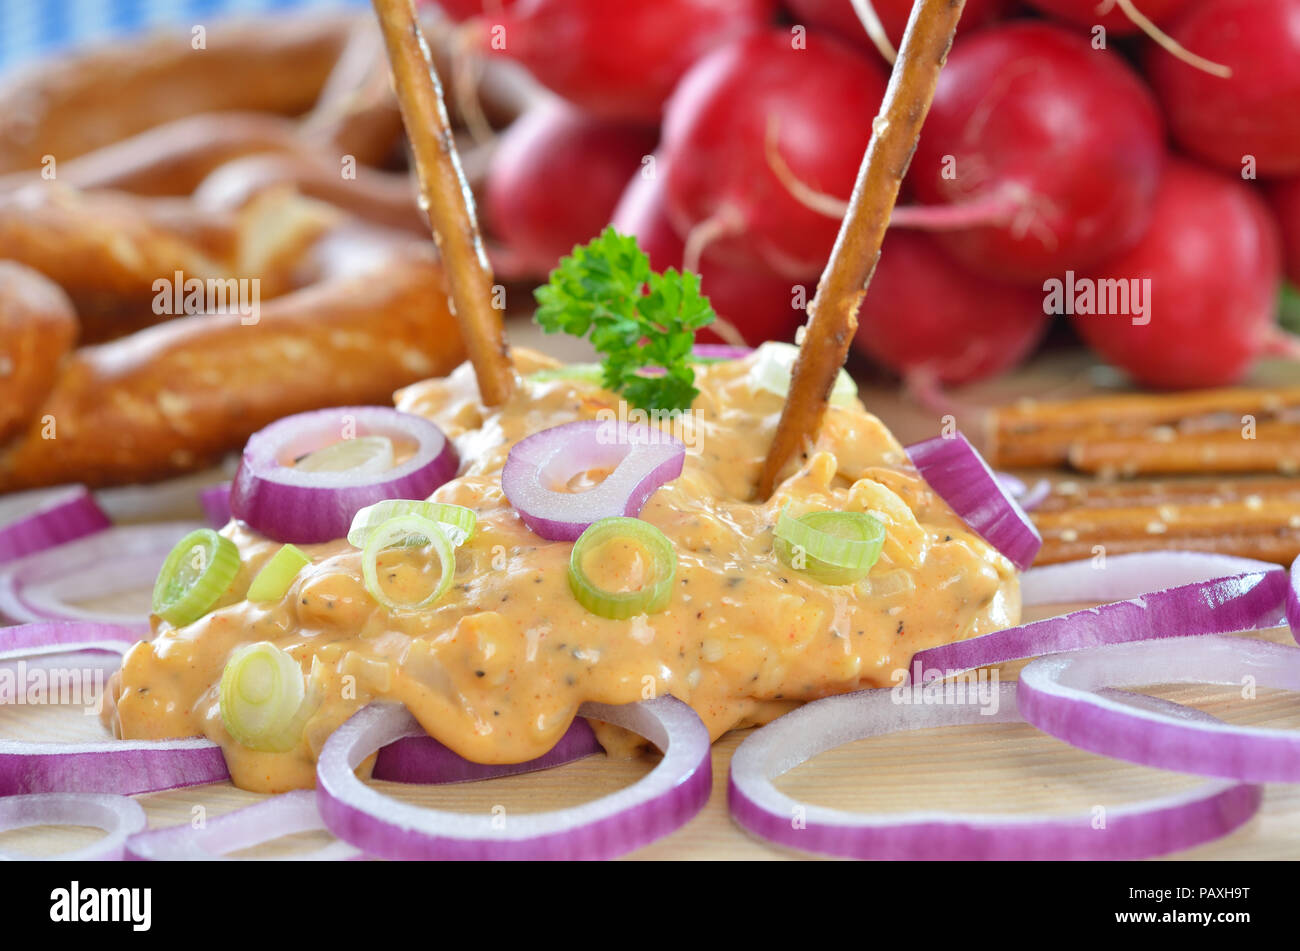 Bavarian cheese specialty called 'obazda', served with onion rings, pretzels and radishes on a wooden plate Stock Photo